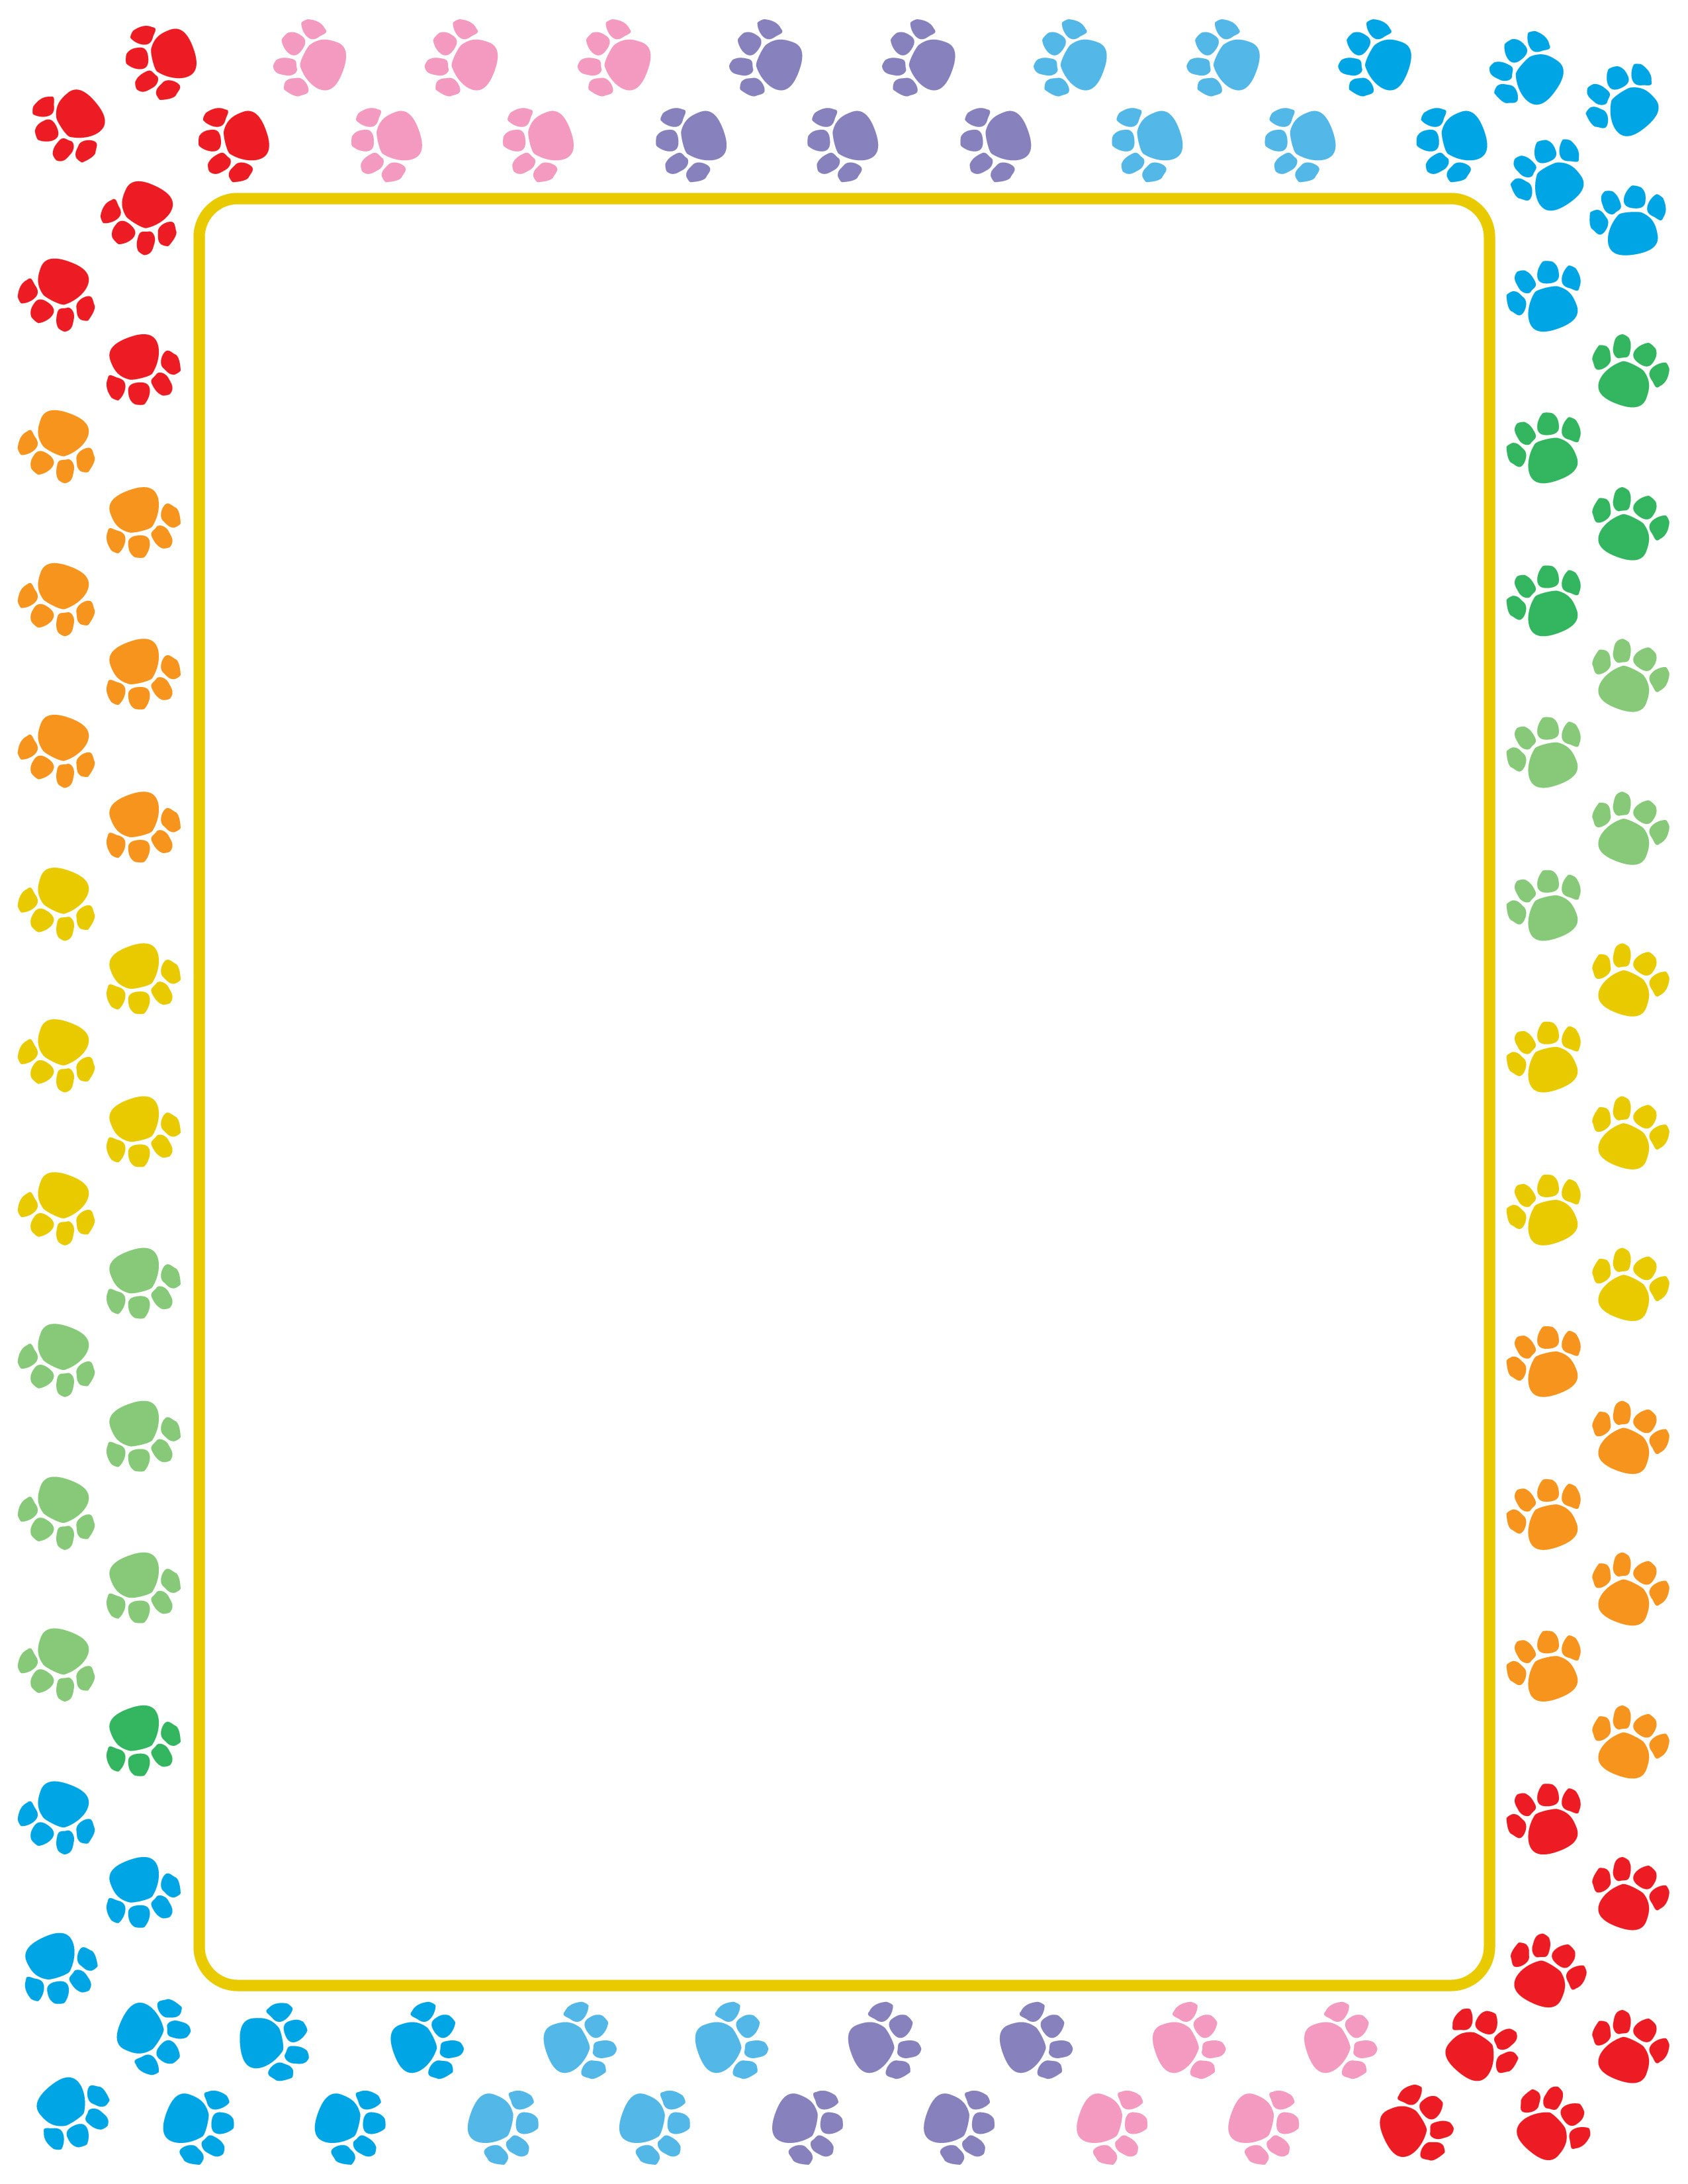 Baby Handprints Stationery Paper 80 Sheets